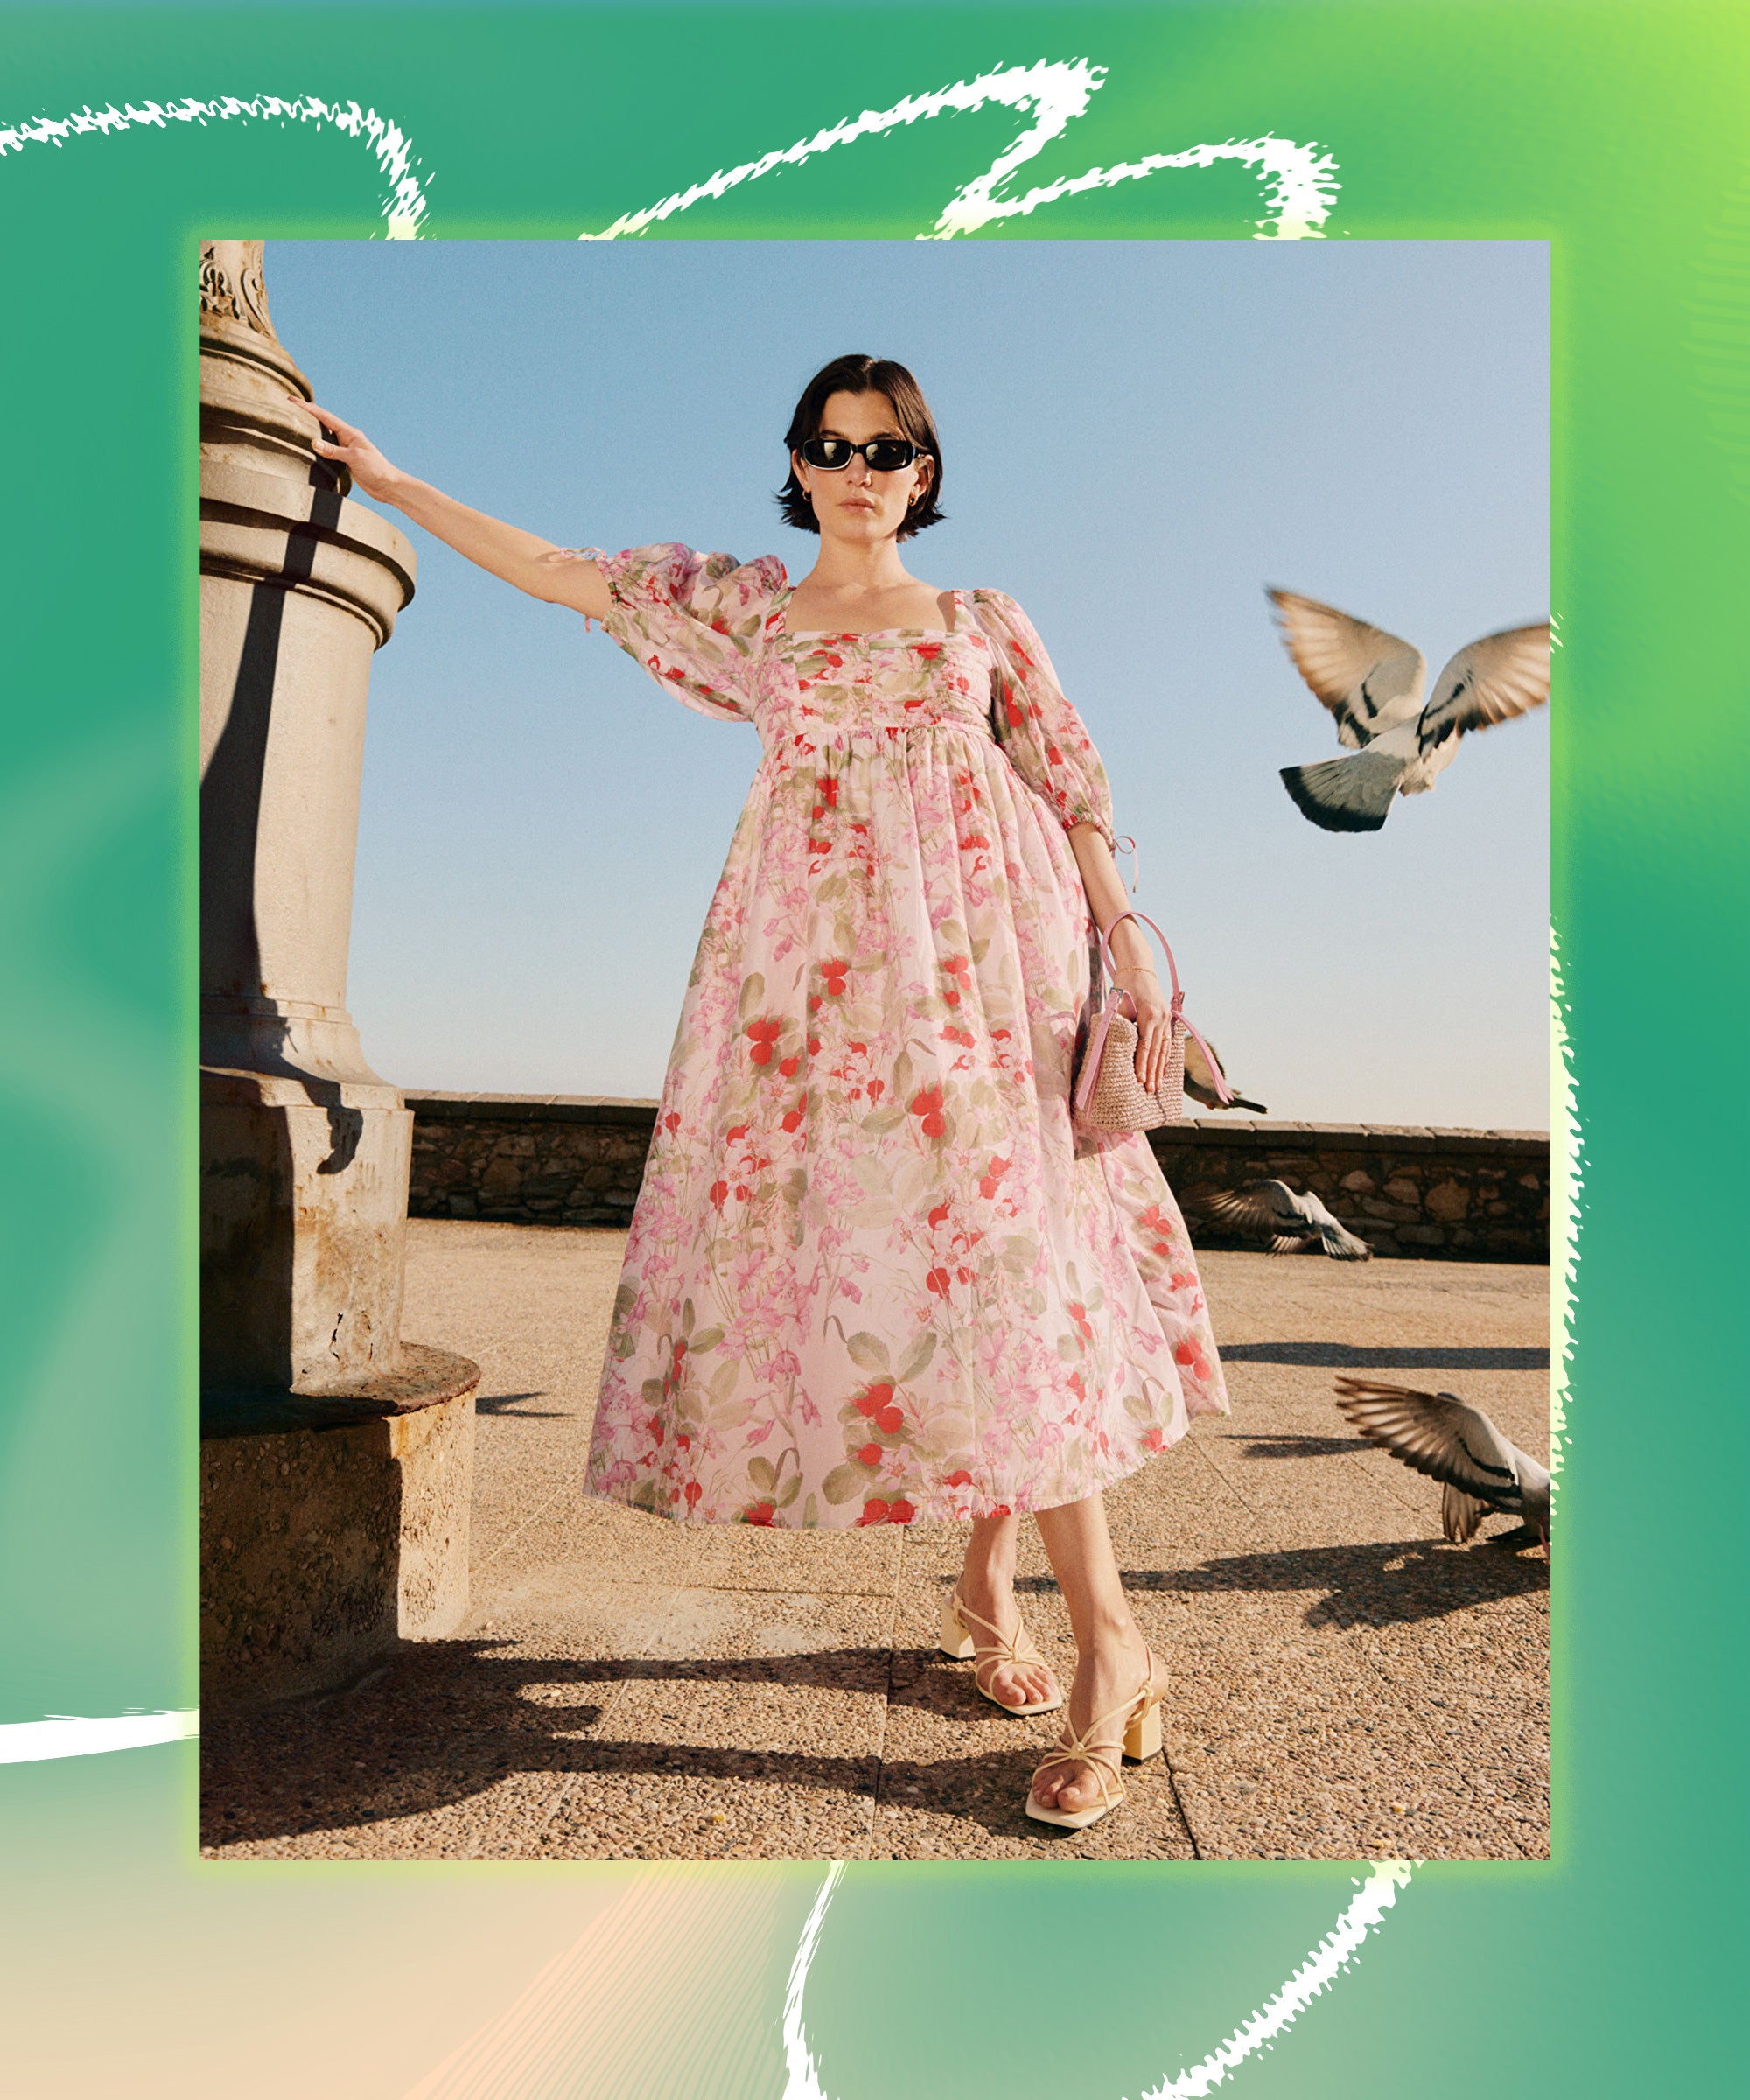 Forever New - Welcome spring with fresh floral dresses and